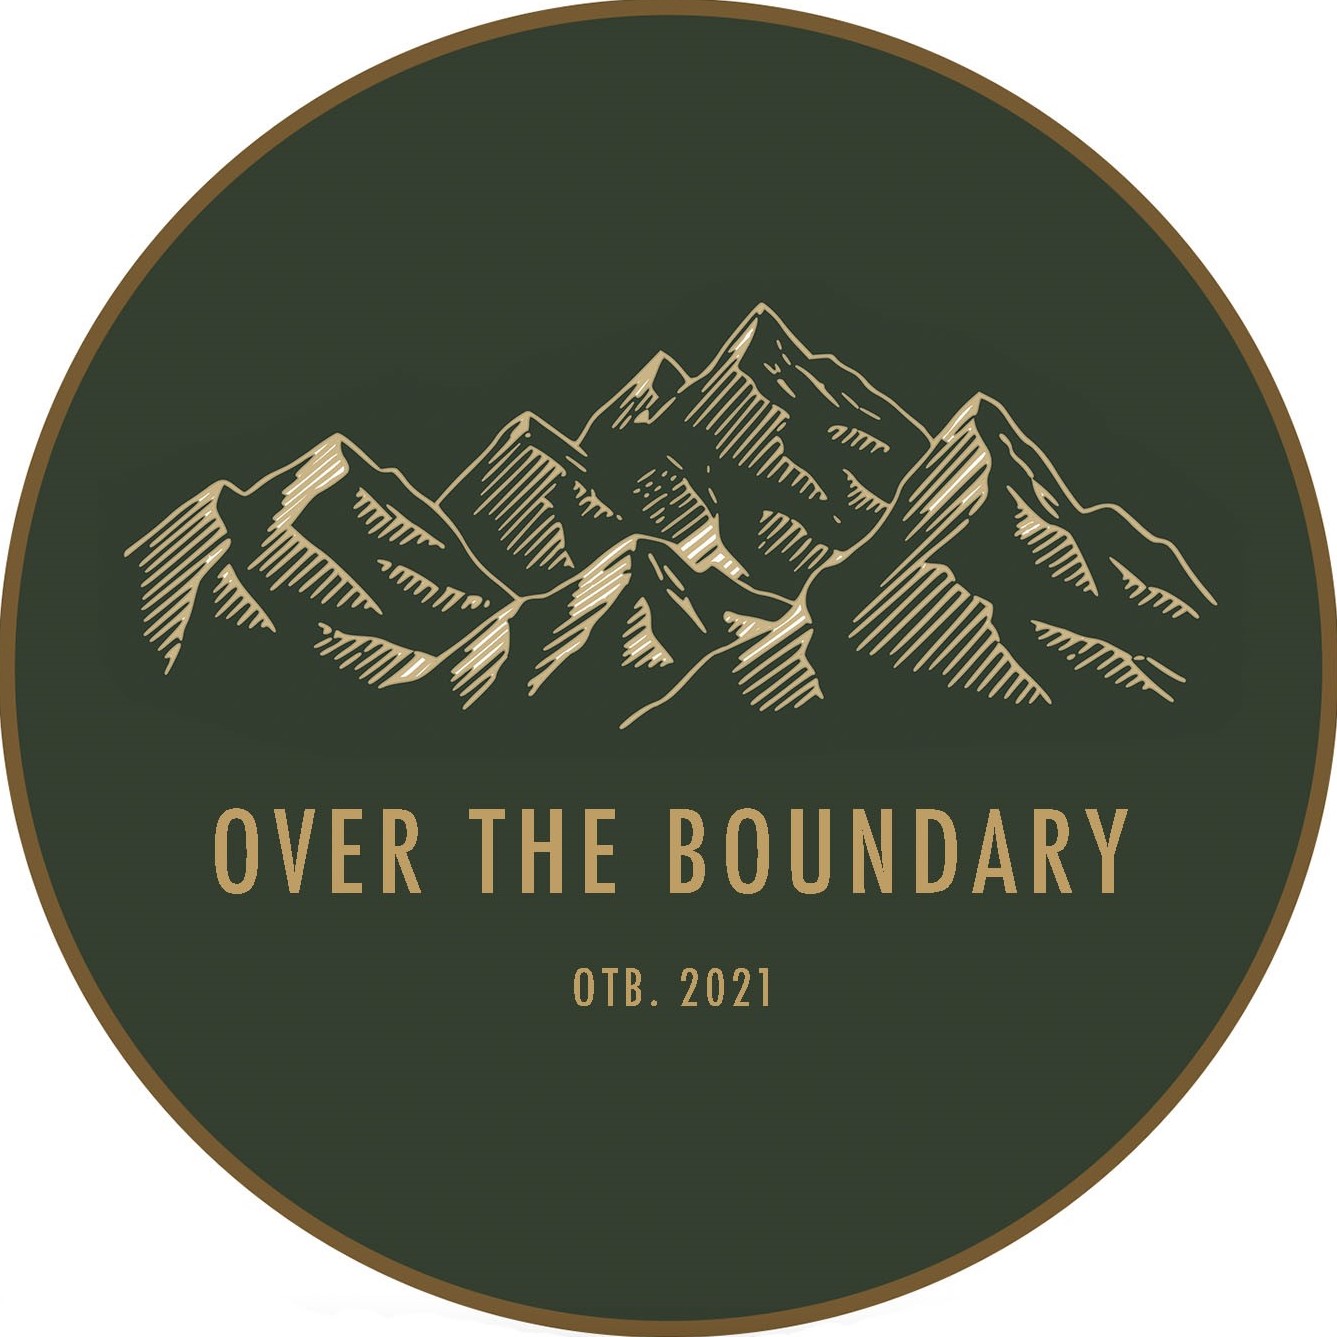 Over The Boundary crest logo. Gold and forest green, with a sketch of mountains and OVER THE BOUNDARY written below in all caps.